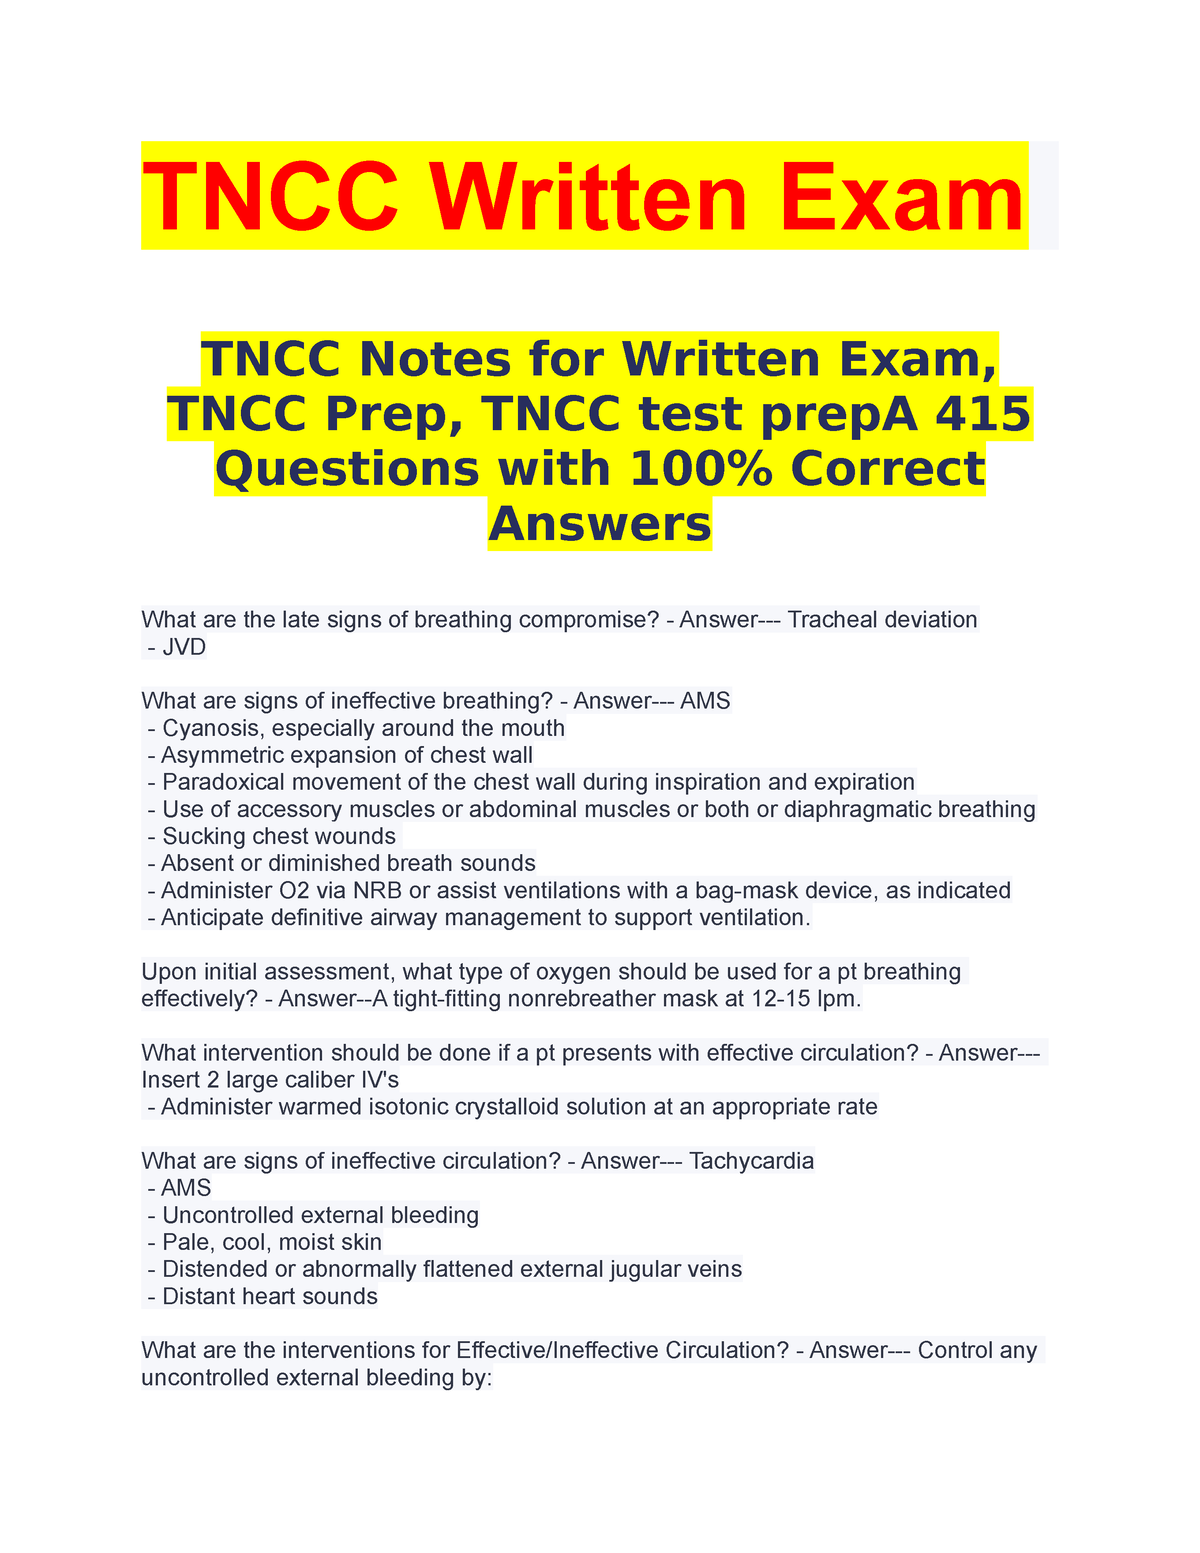 TNCC Written Exam Exams with their 100 correct answers TNCC